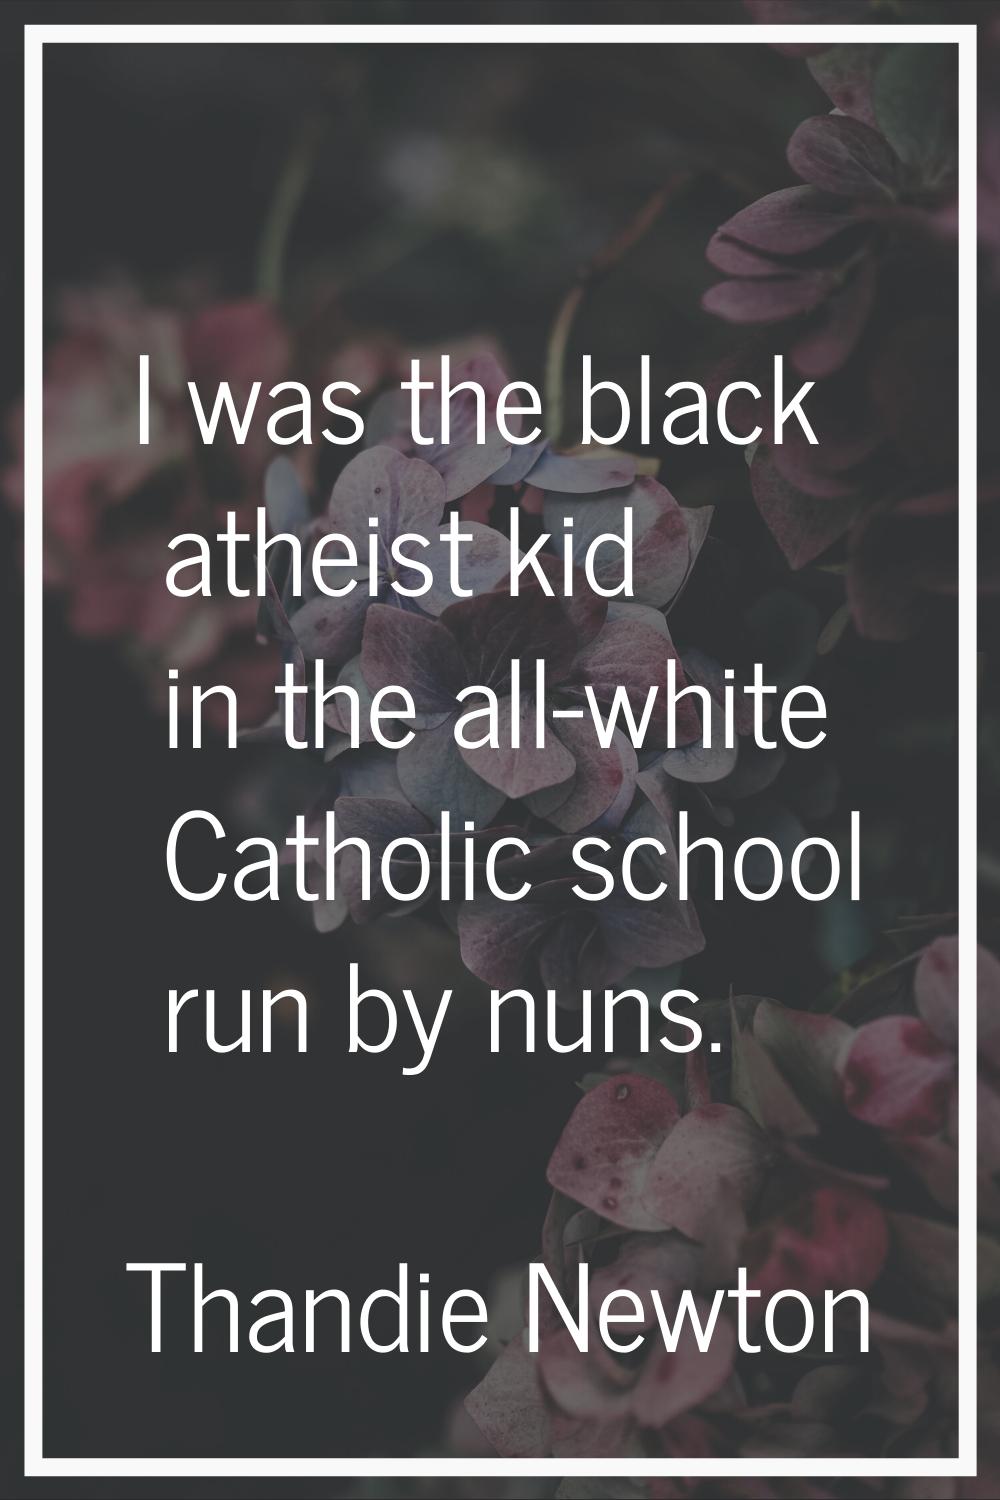 I was the black atheist kid in the all-white Catholic school run by nuns.